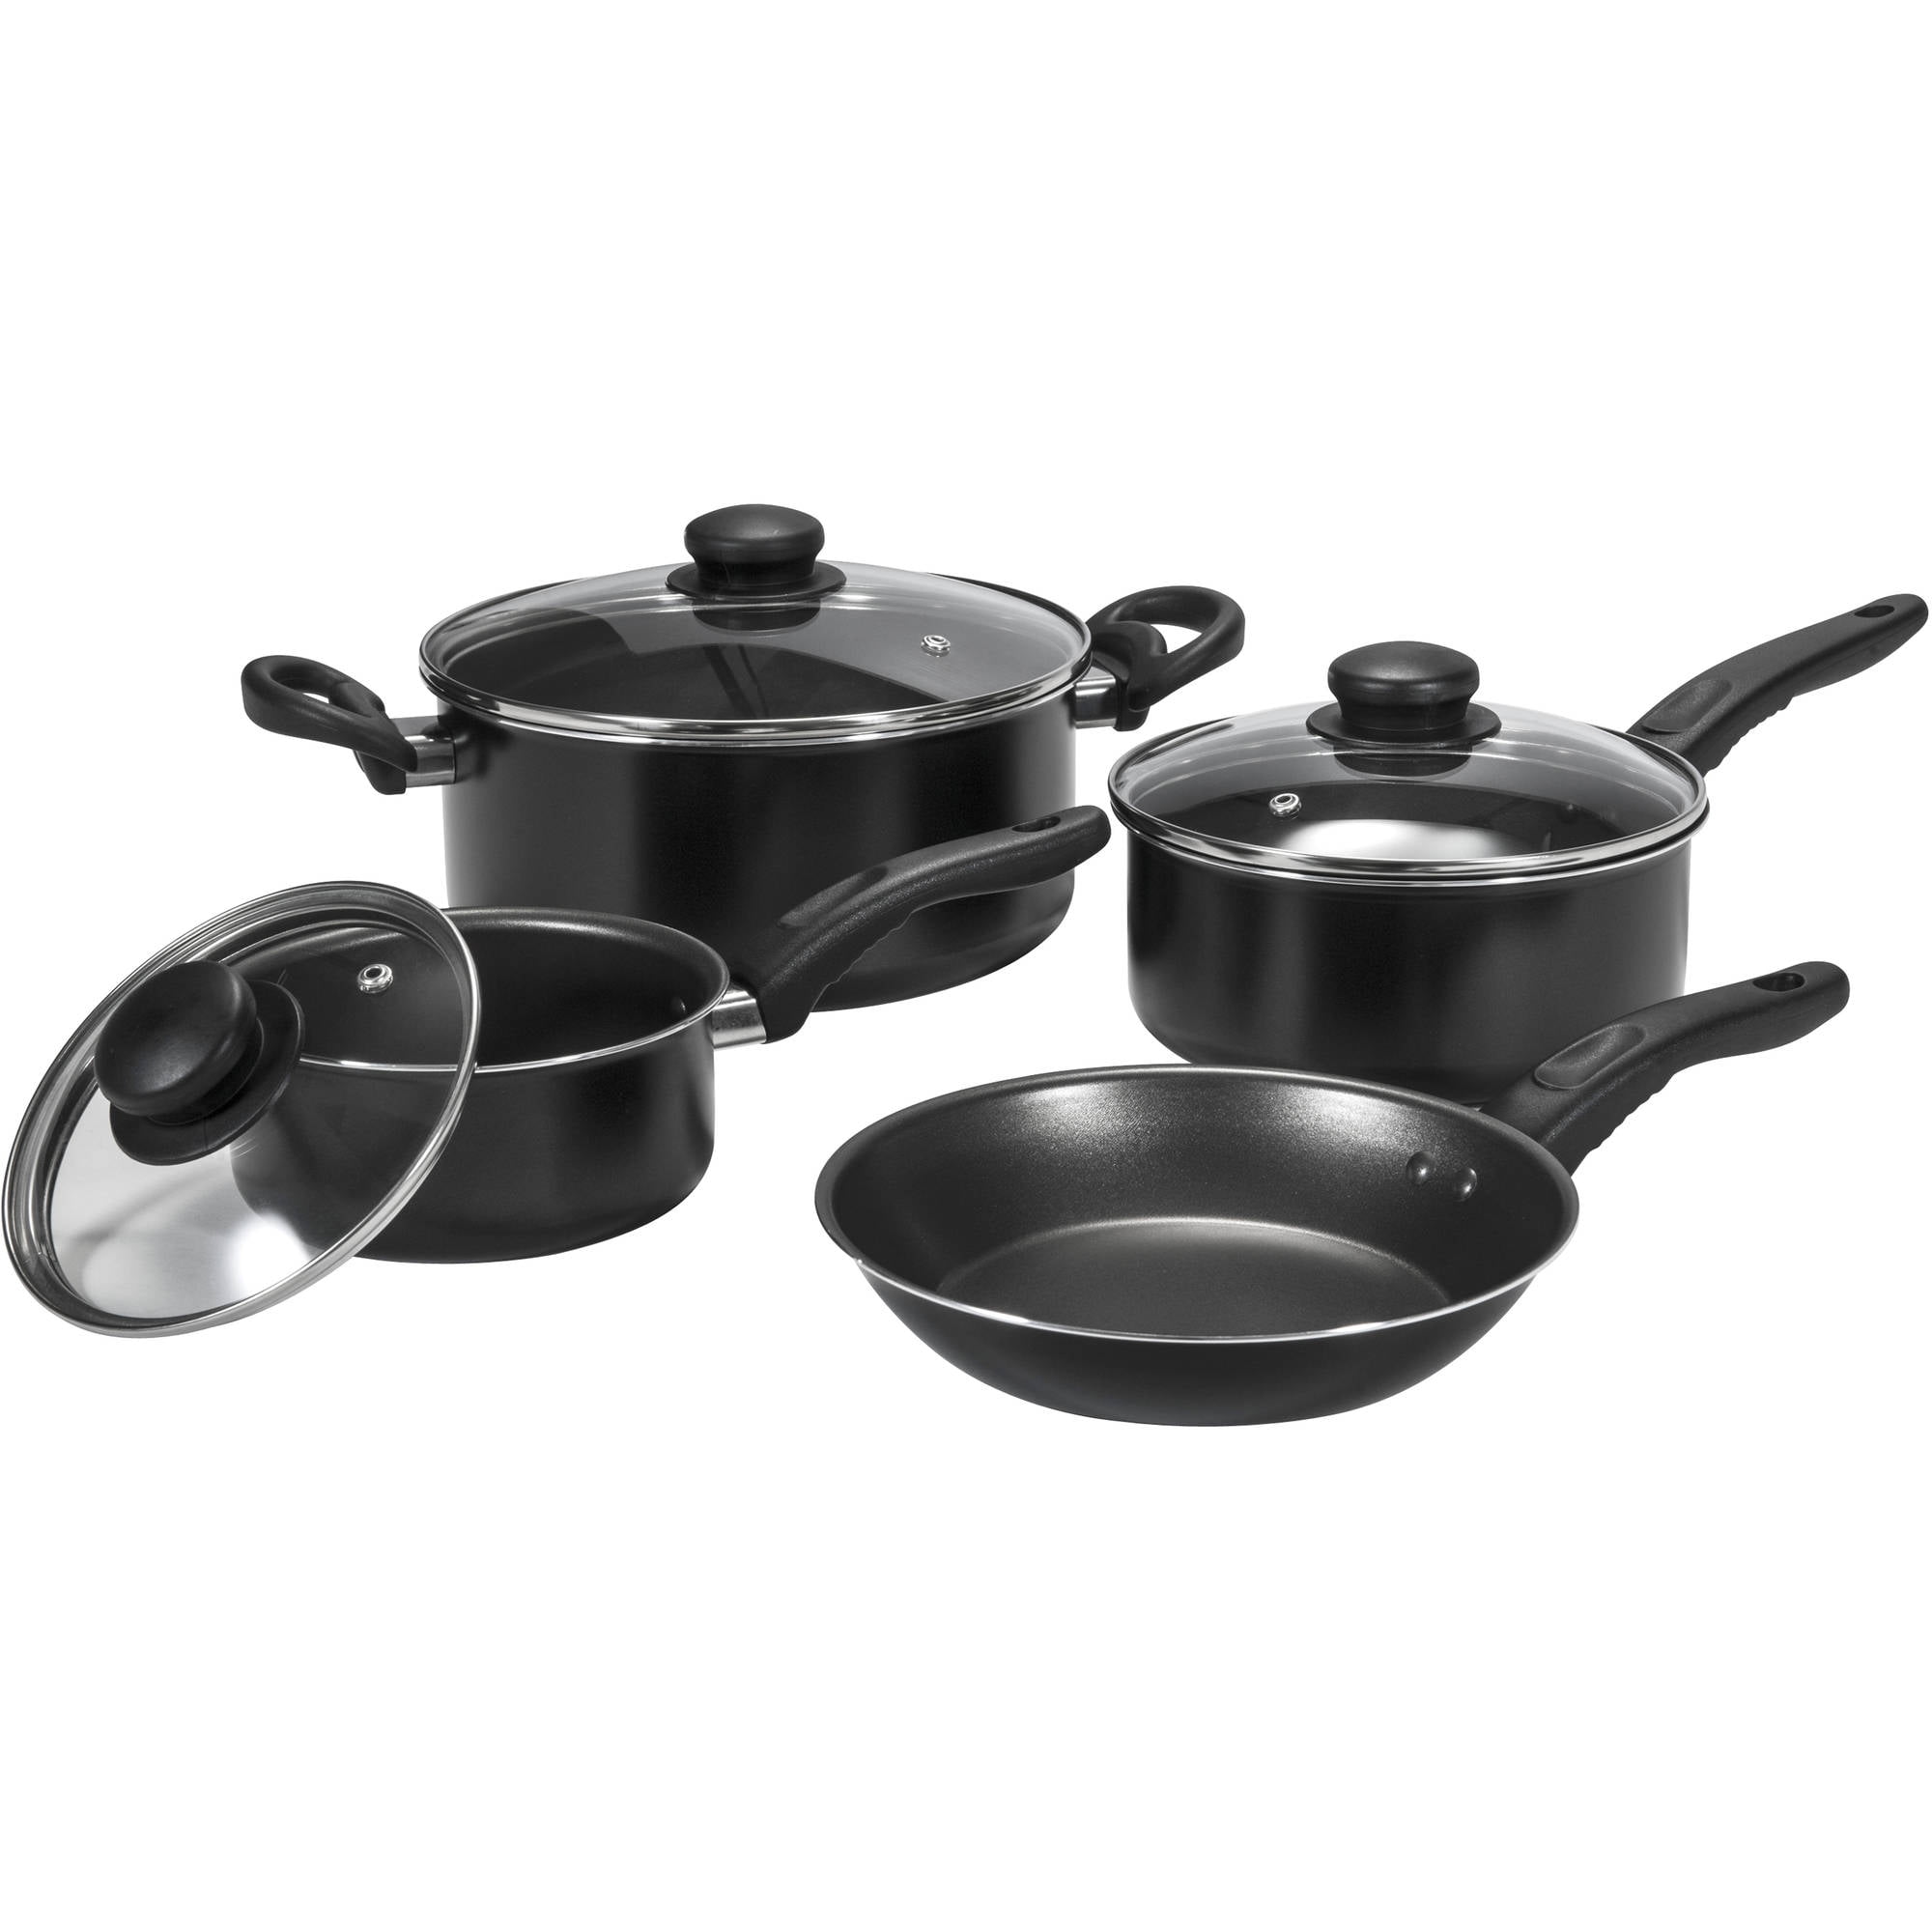 Meythway Stainless Steel Pots and Pans Set Nonstick, 6-Piece Kitchen  Cookware Sets with Stay-Cool Handles, Non-Toxic, Dishwasher Safe &  Compatible